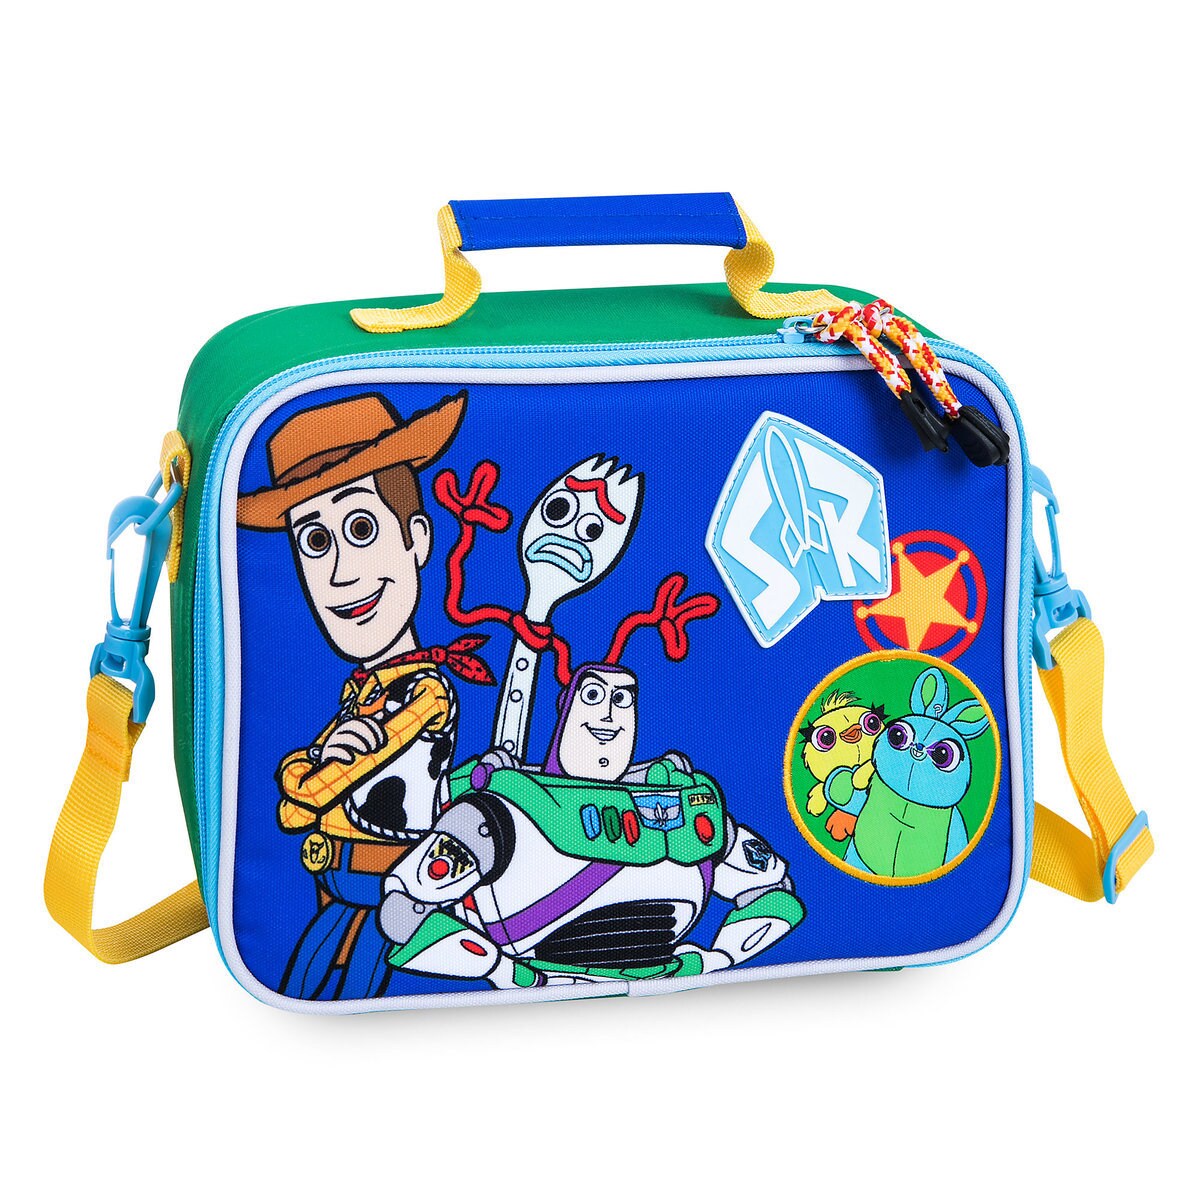 Product Image of Toy Story 4 Lunch Box # 1